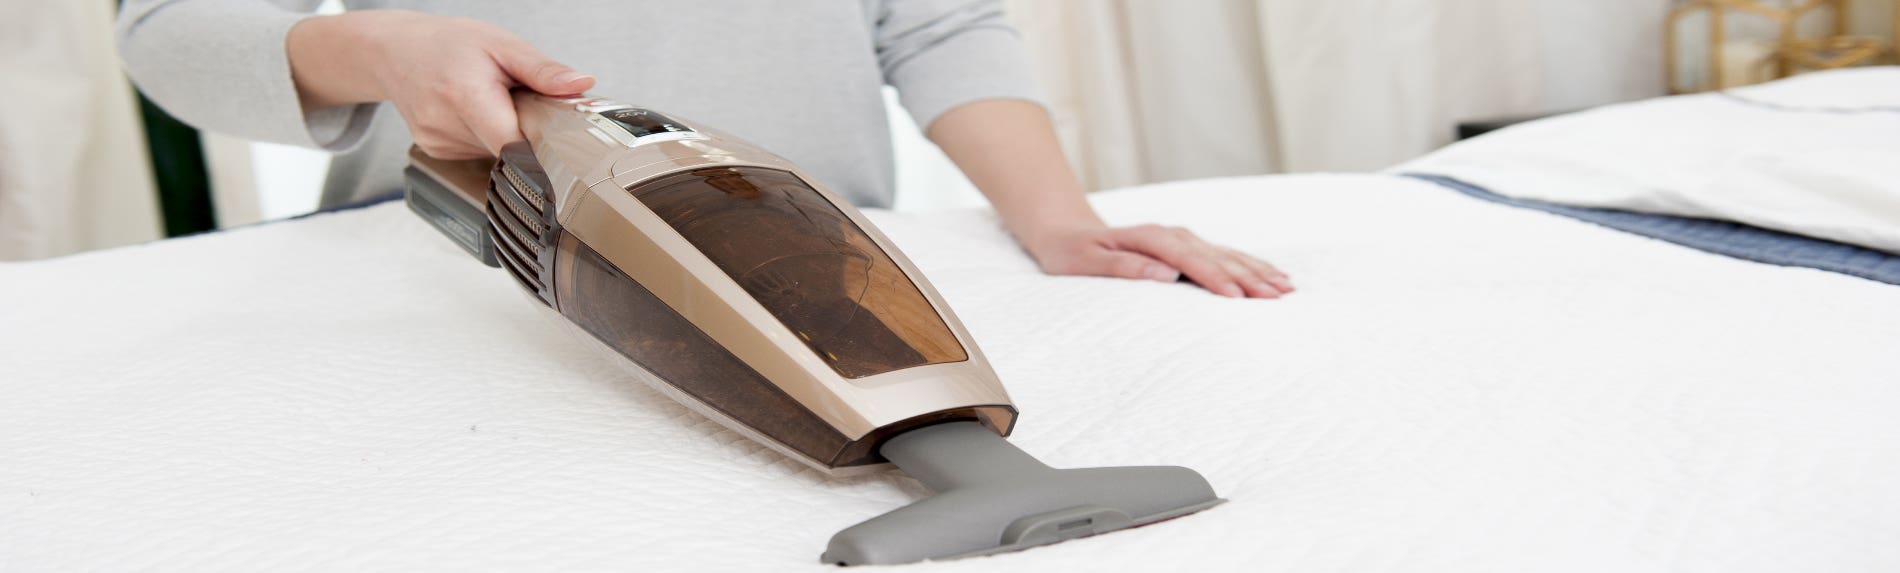 Clean The Mattress With A Vacuum Cleaner